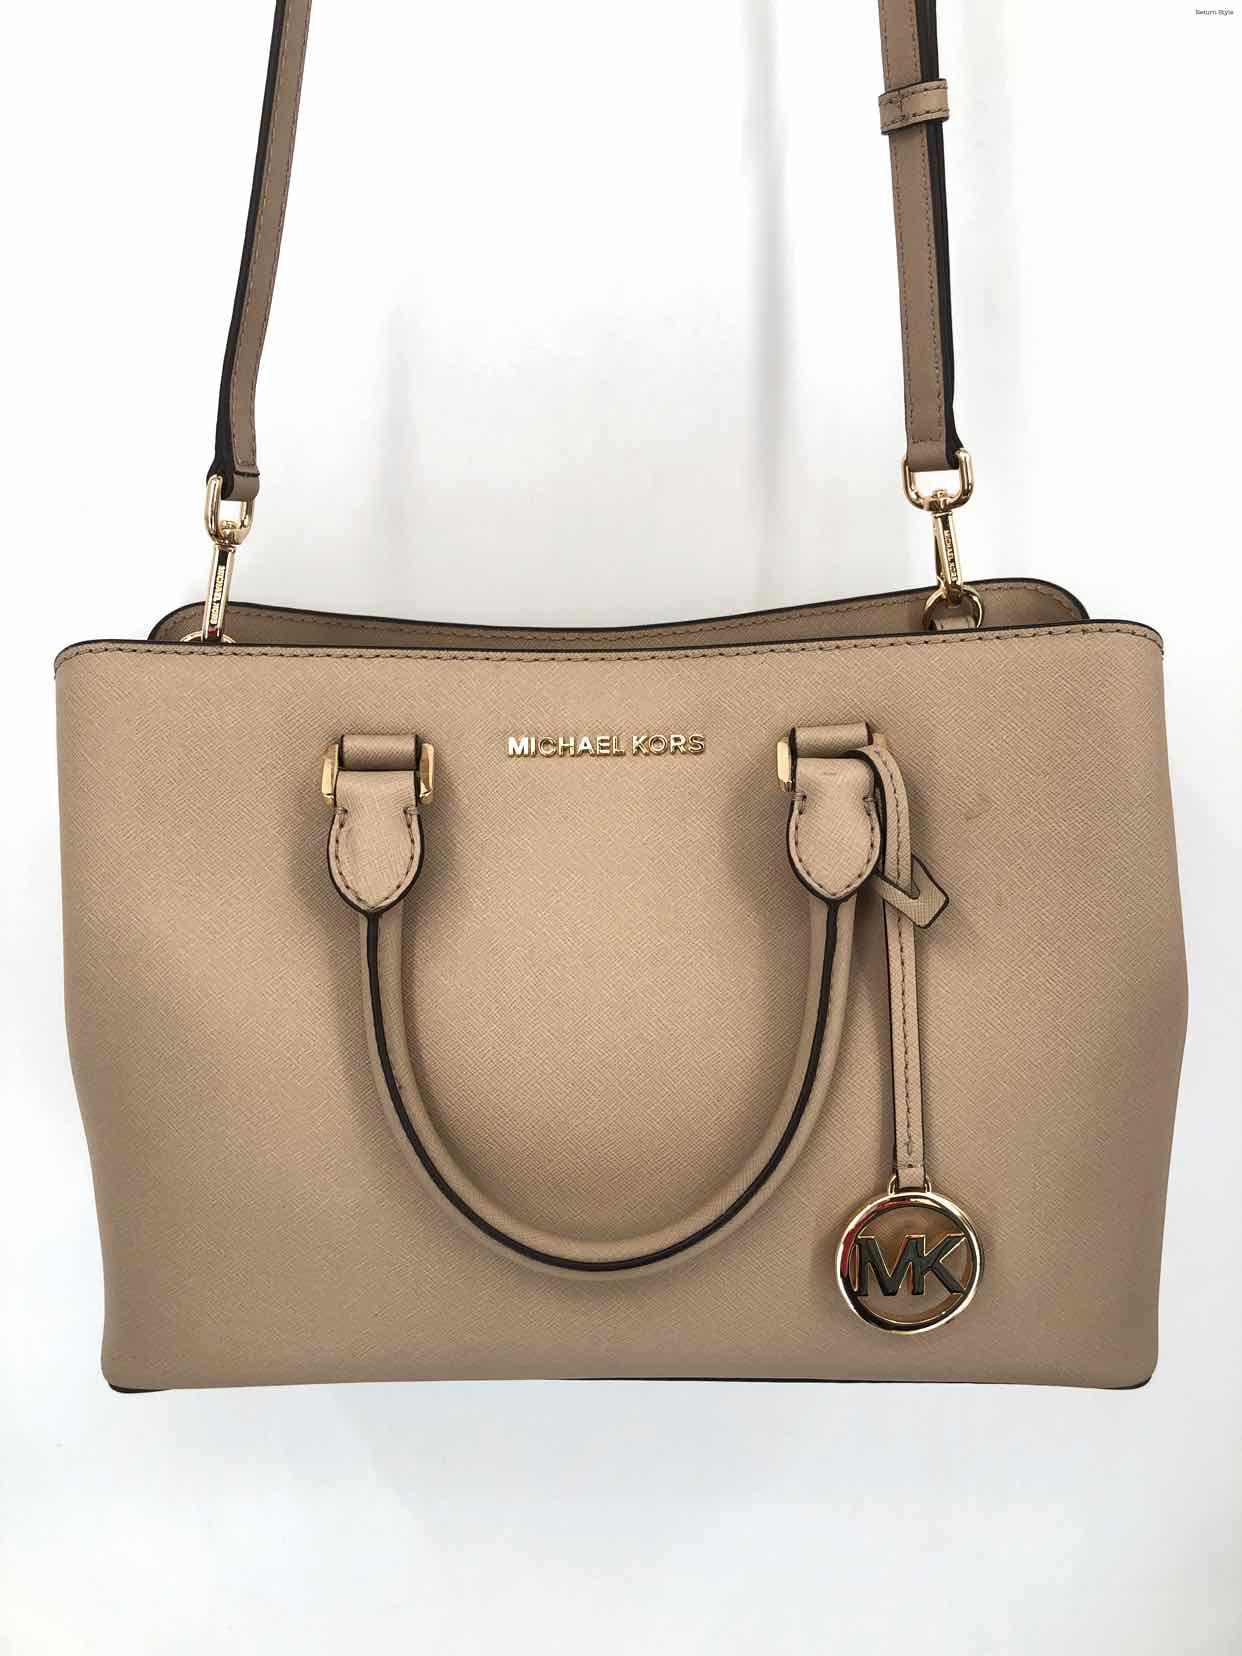 Michael Kors White Leather Purse Brown Leather Straps Gold Hardware | eBay